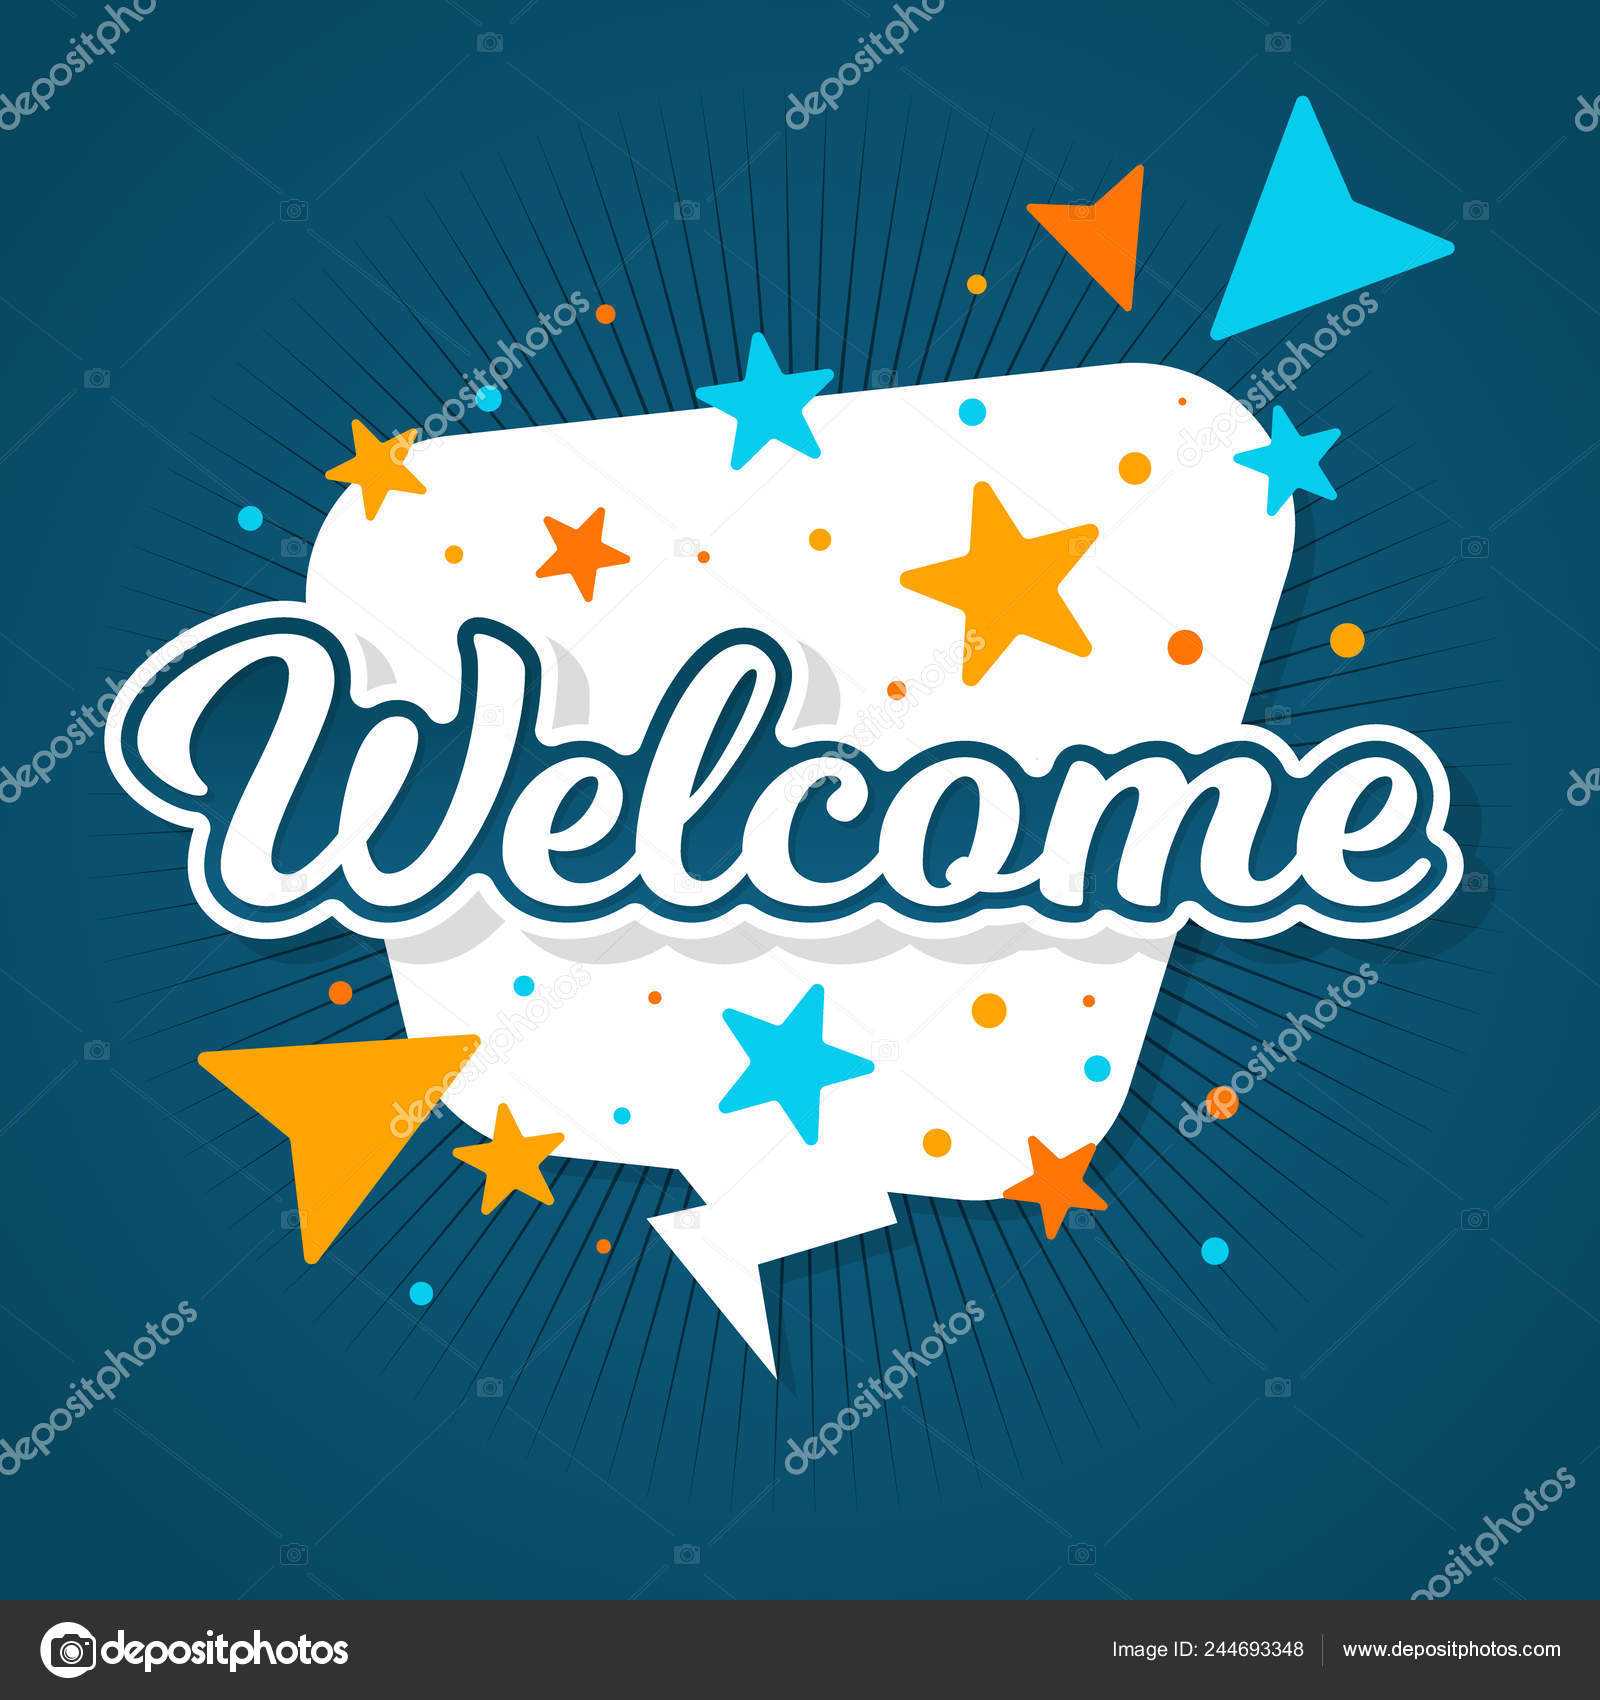 Welcome Letters Banner Flowing Liquid Shapes Template Design With Regard To Welcome Banner Template